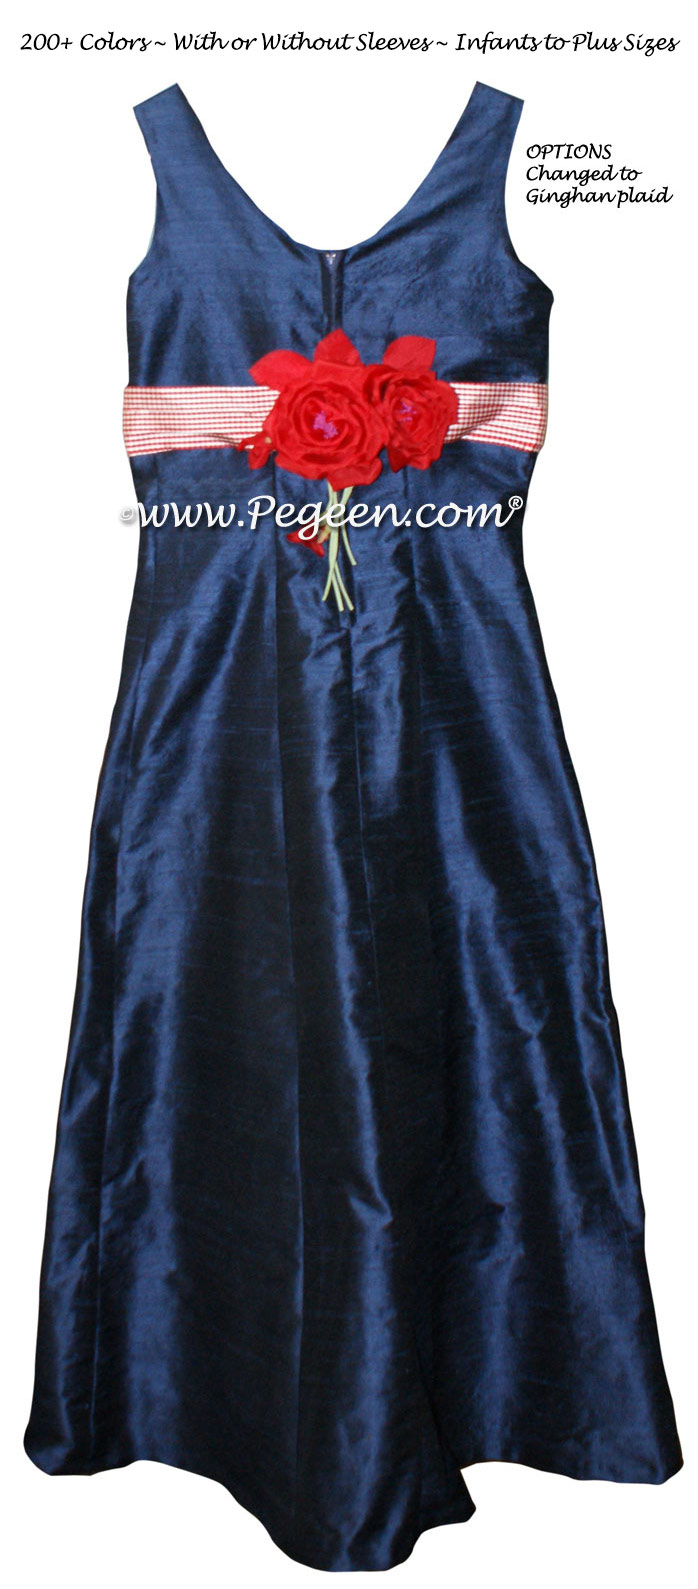 Jr Bridesmaids Dresses - Style 320 Navy and Red Gingham Silk | Pegeen